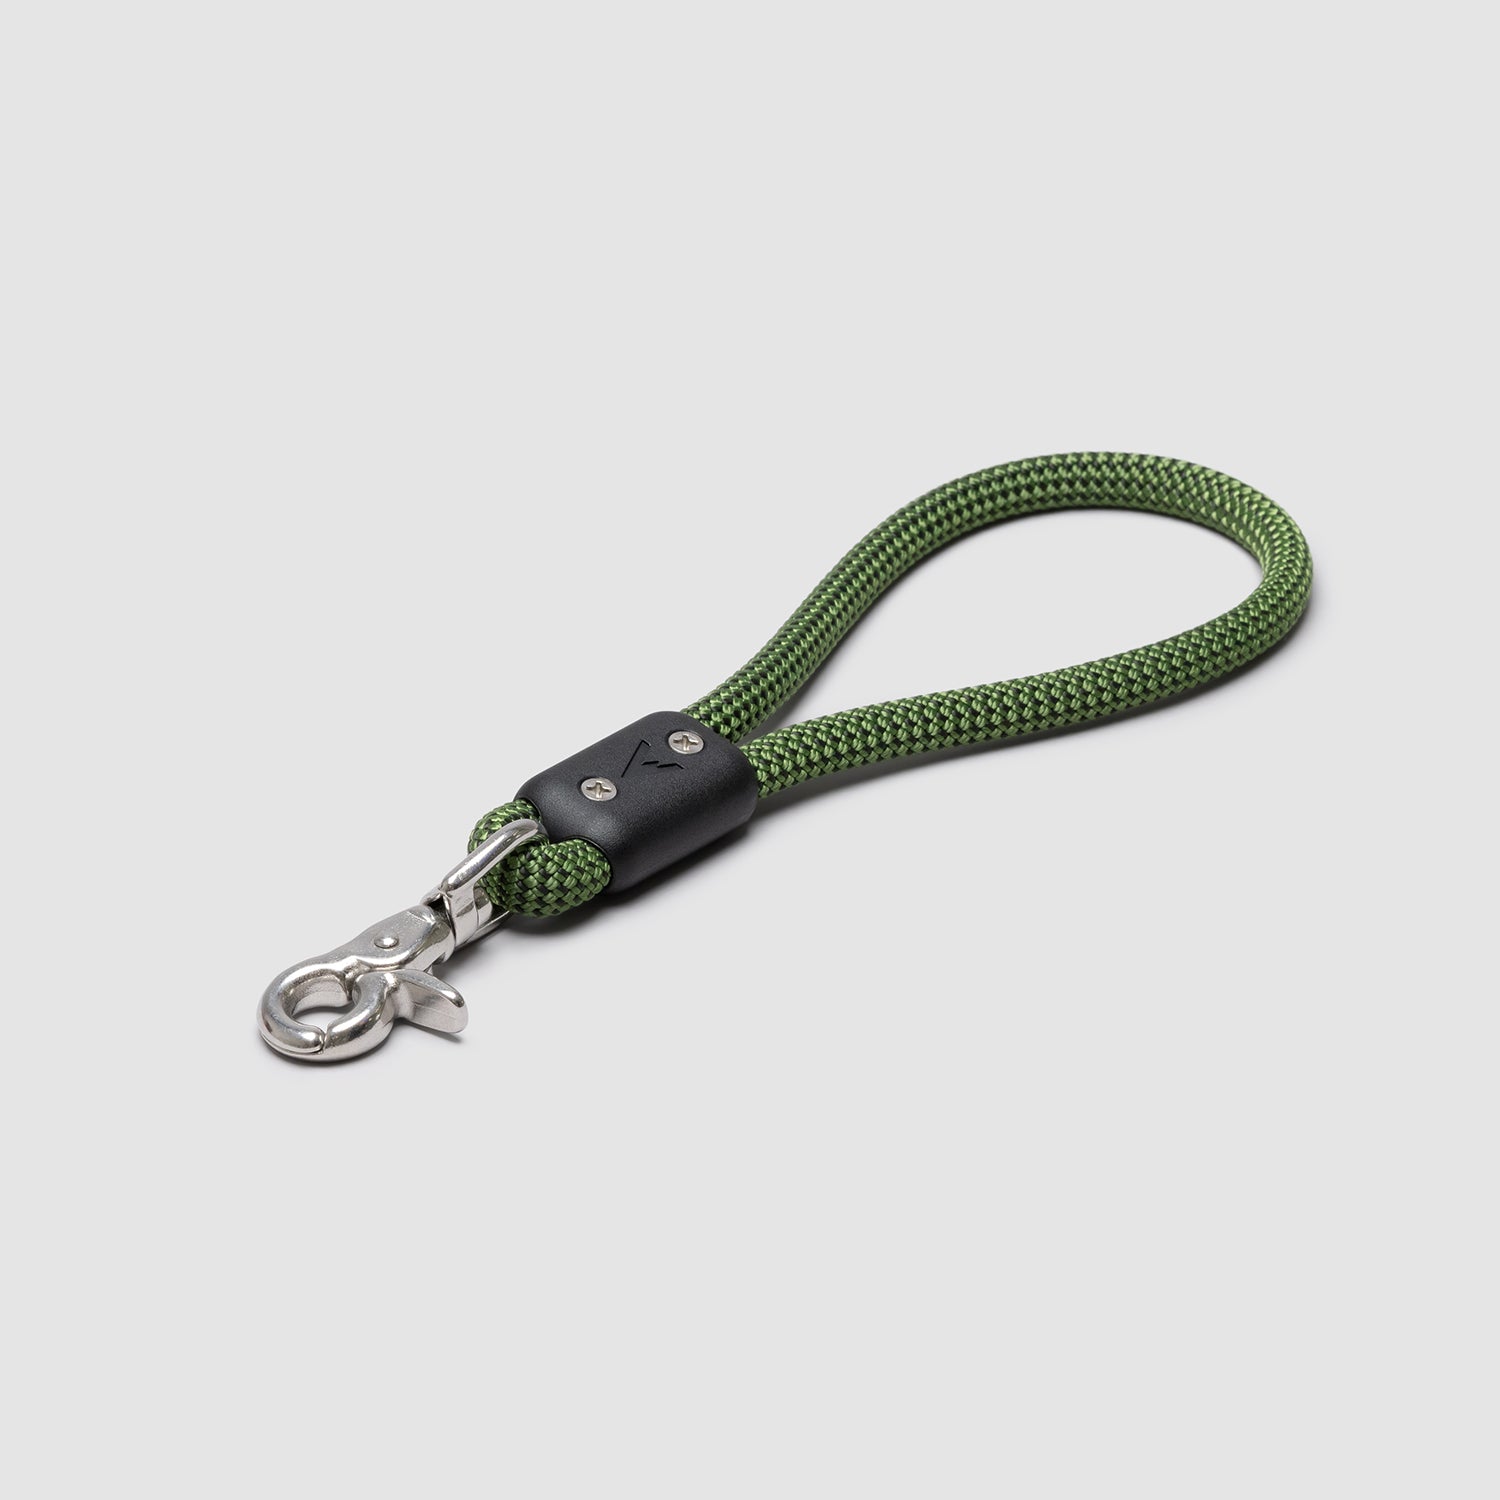 atlas pet company lifetime handle climbing rope lifetime warranty trail handle for active dogs --moss